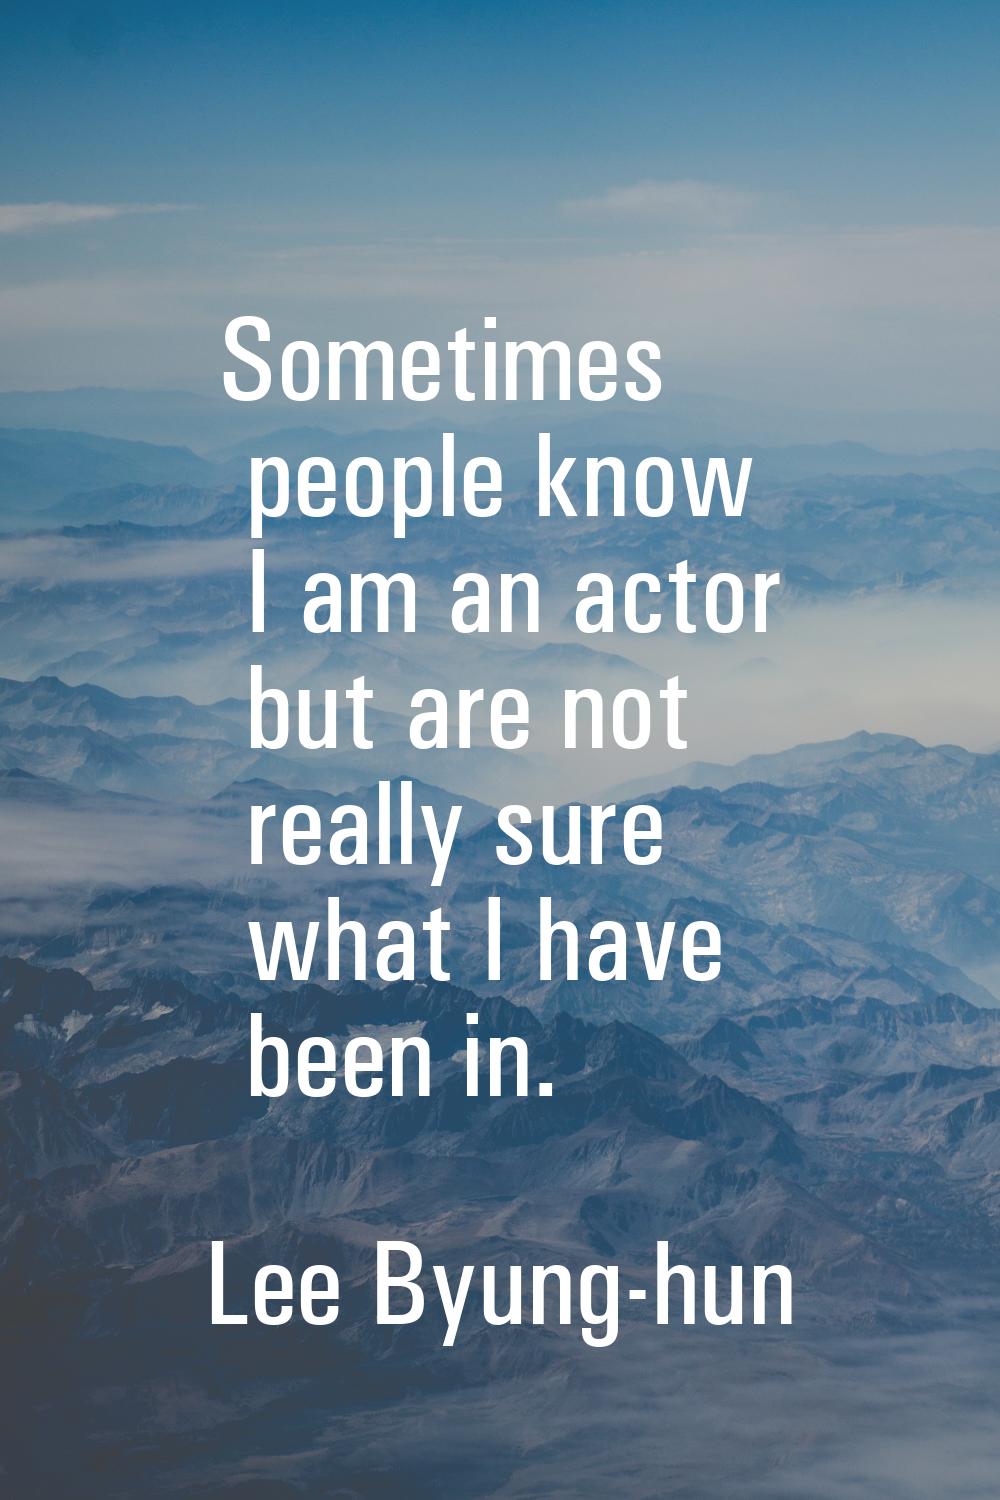 Sometimes people know I am an actor but are not really sure what I have been in.